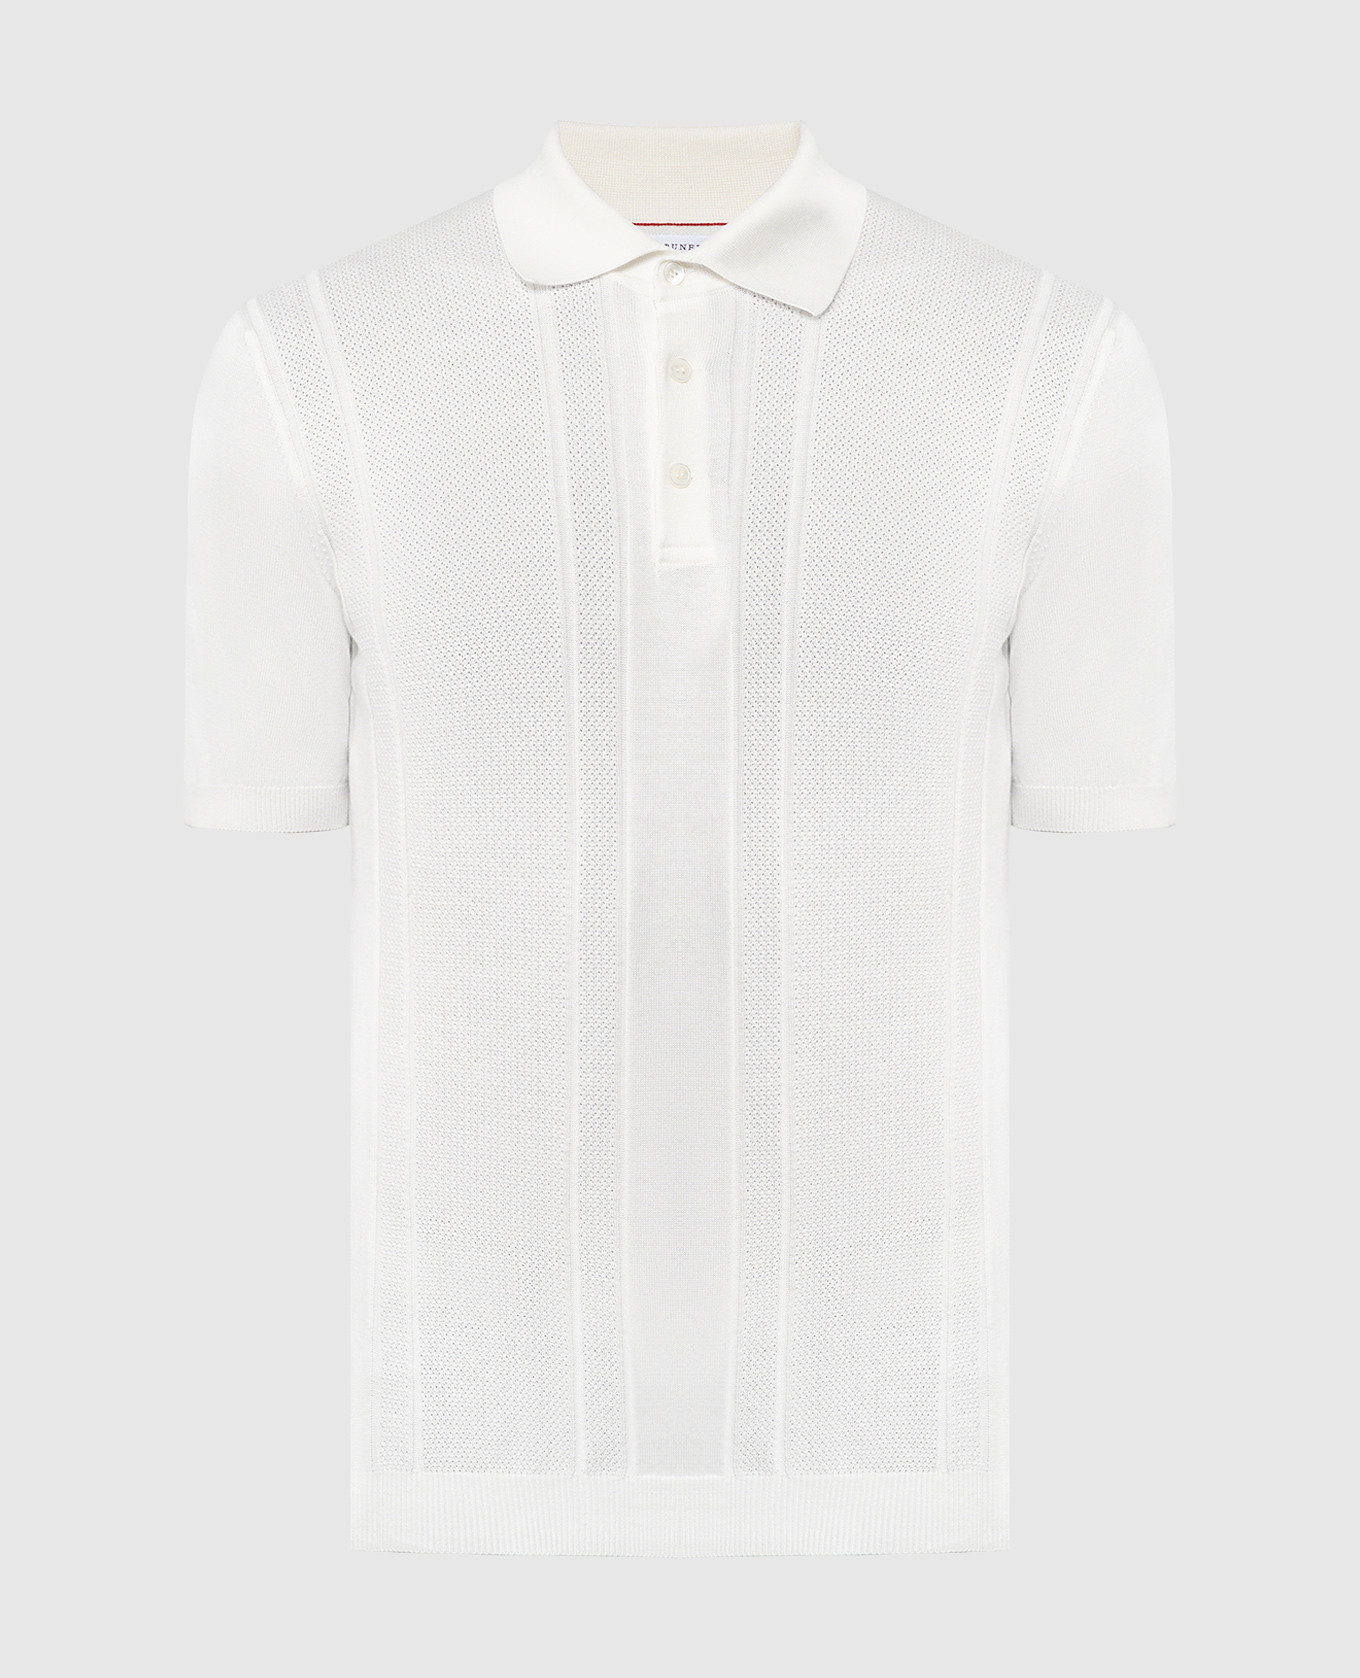 White polo shirt with textured pattern